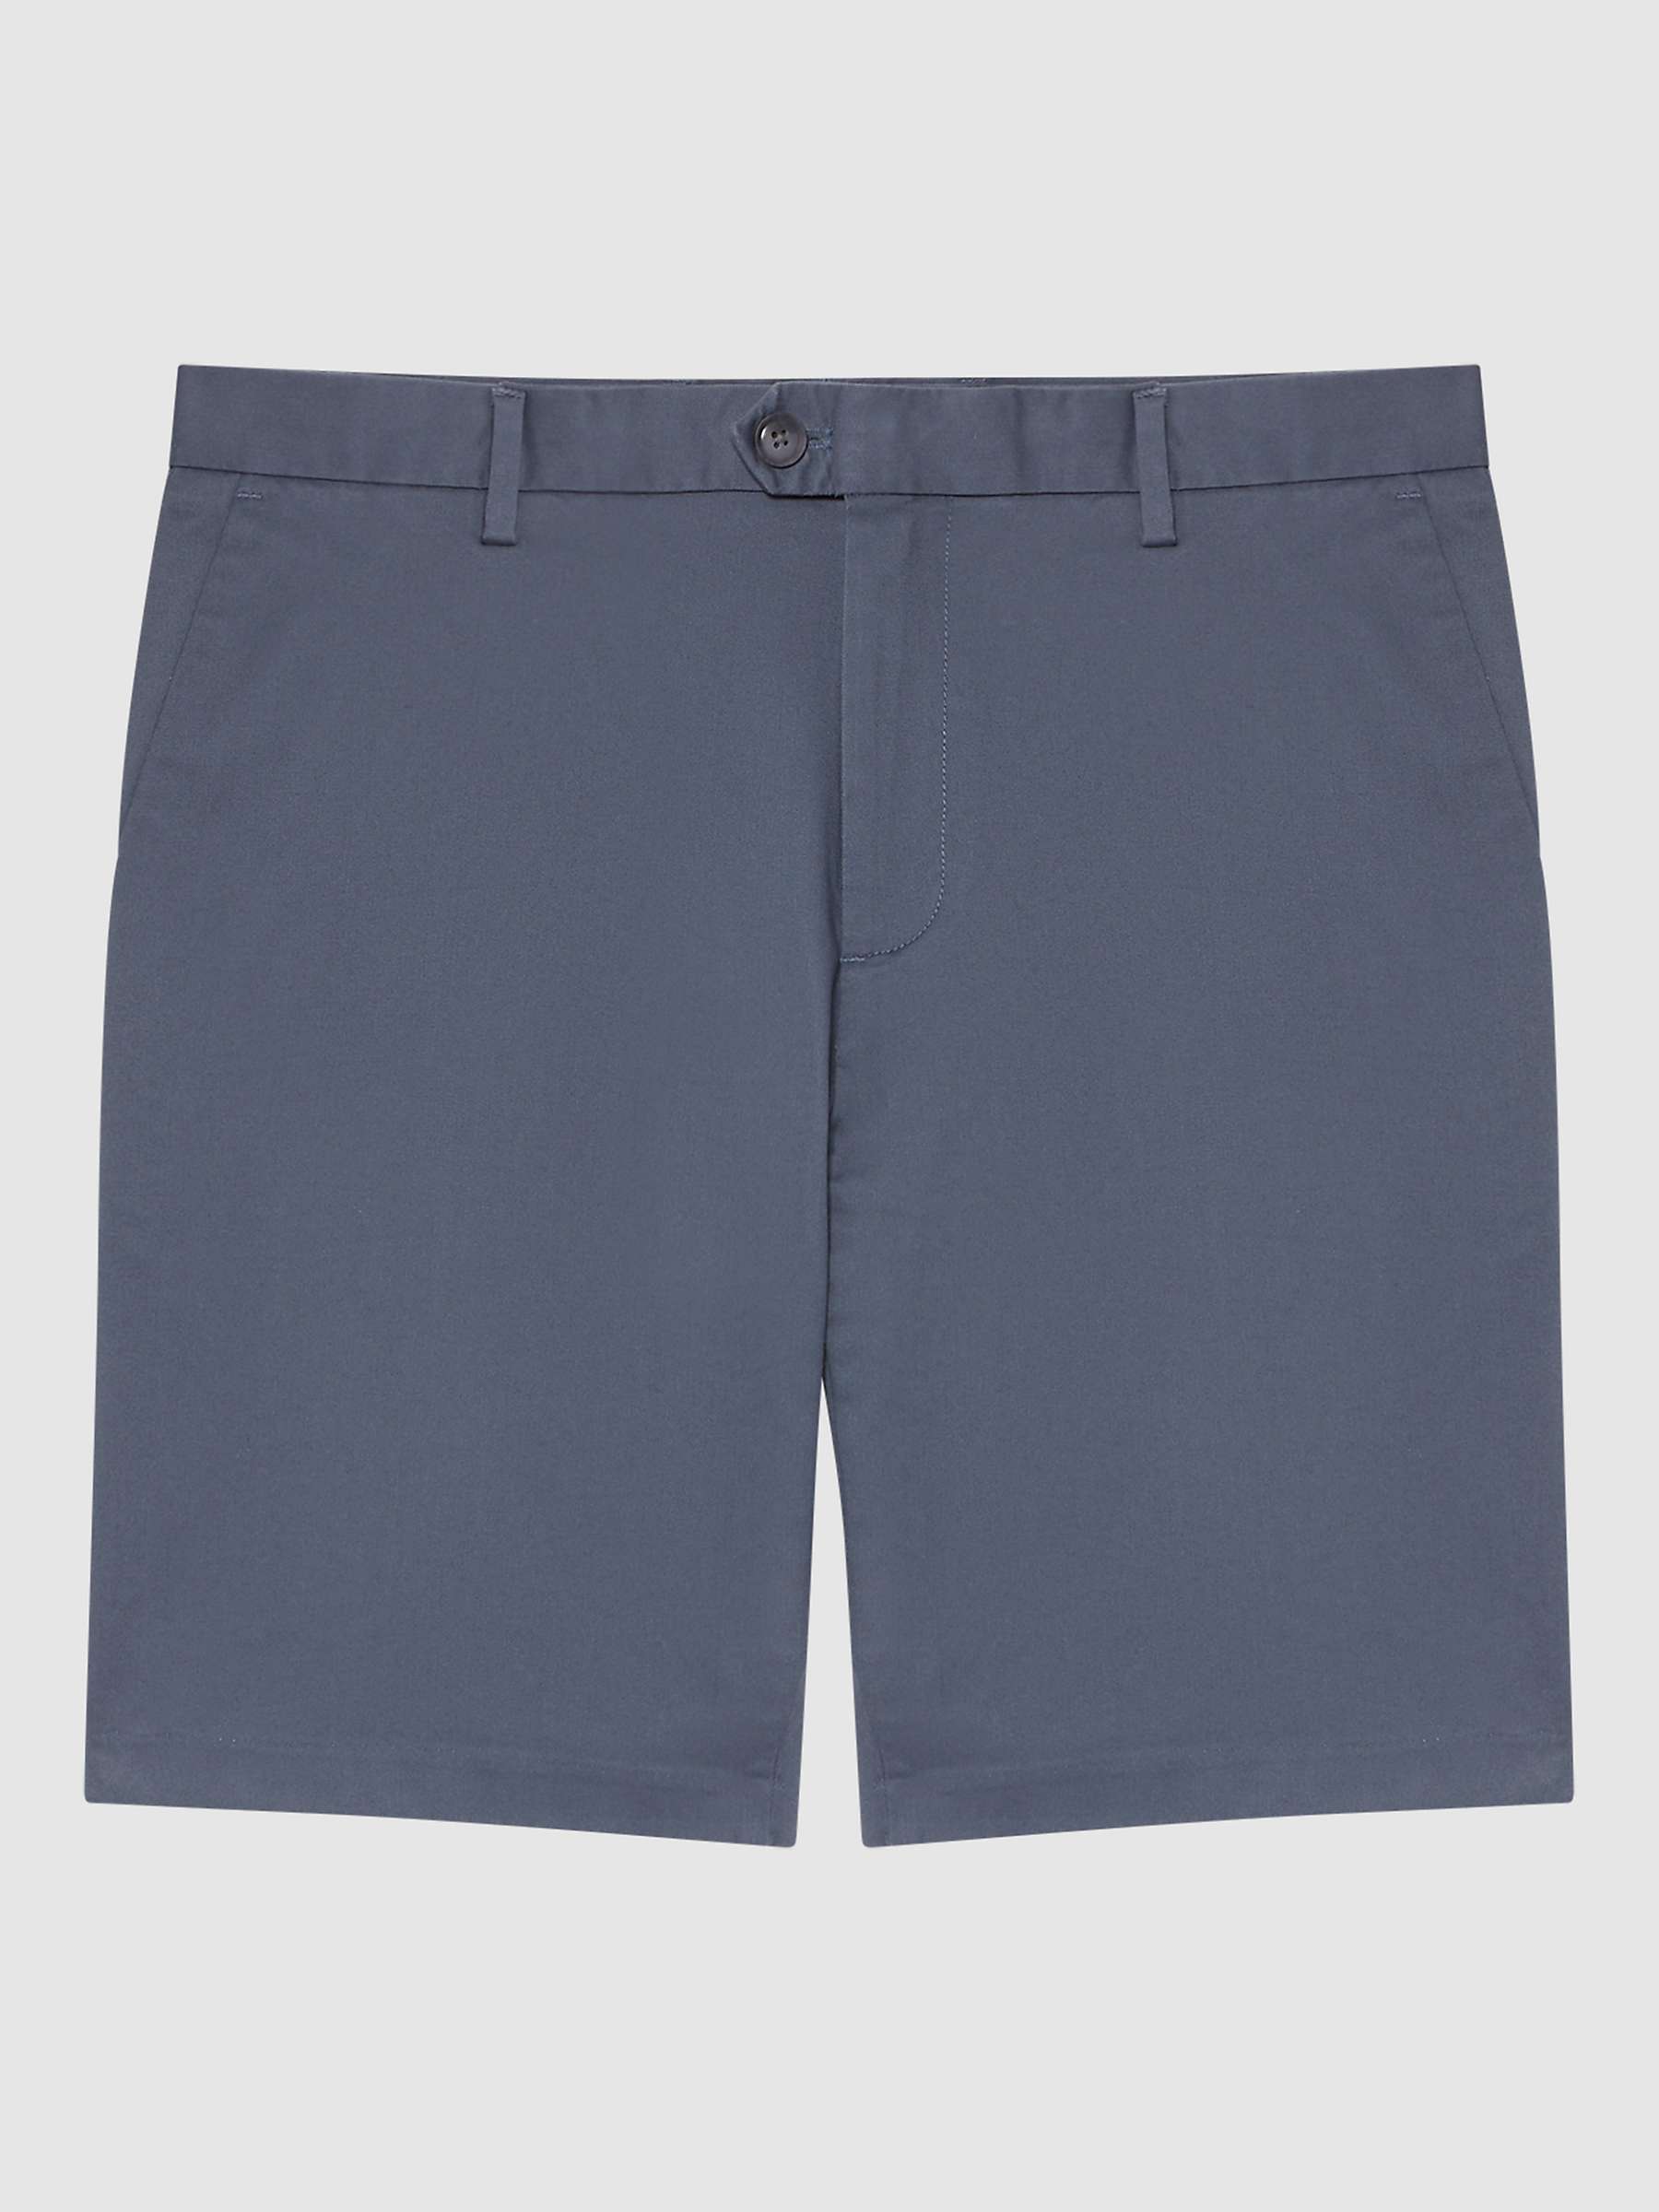 Reiss Wicket Casual Chino Shorts, Airforce Blue at John Lewis & Partners